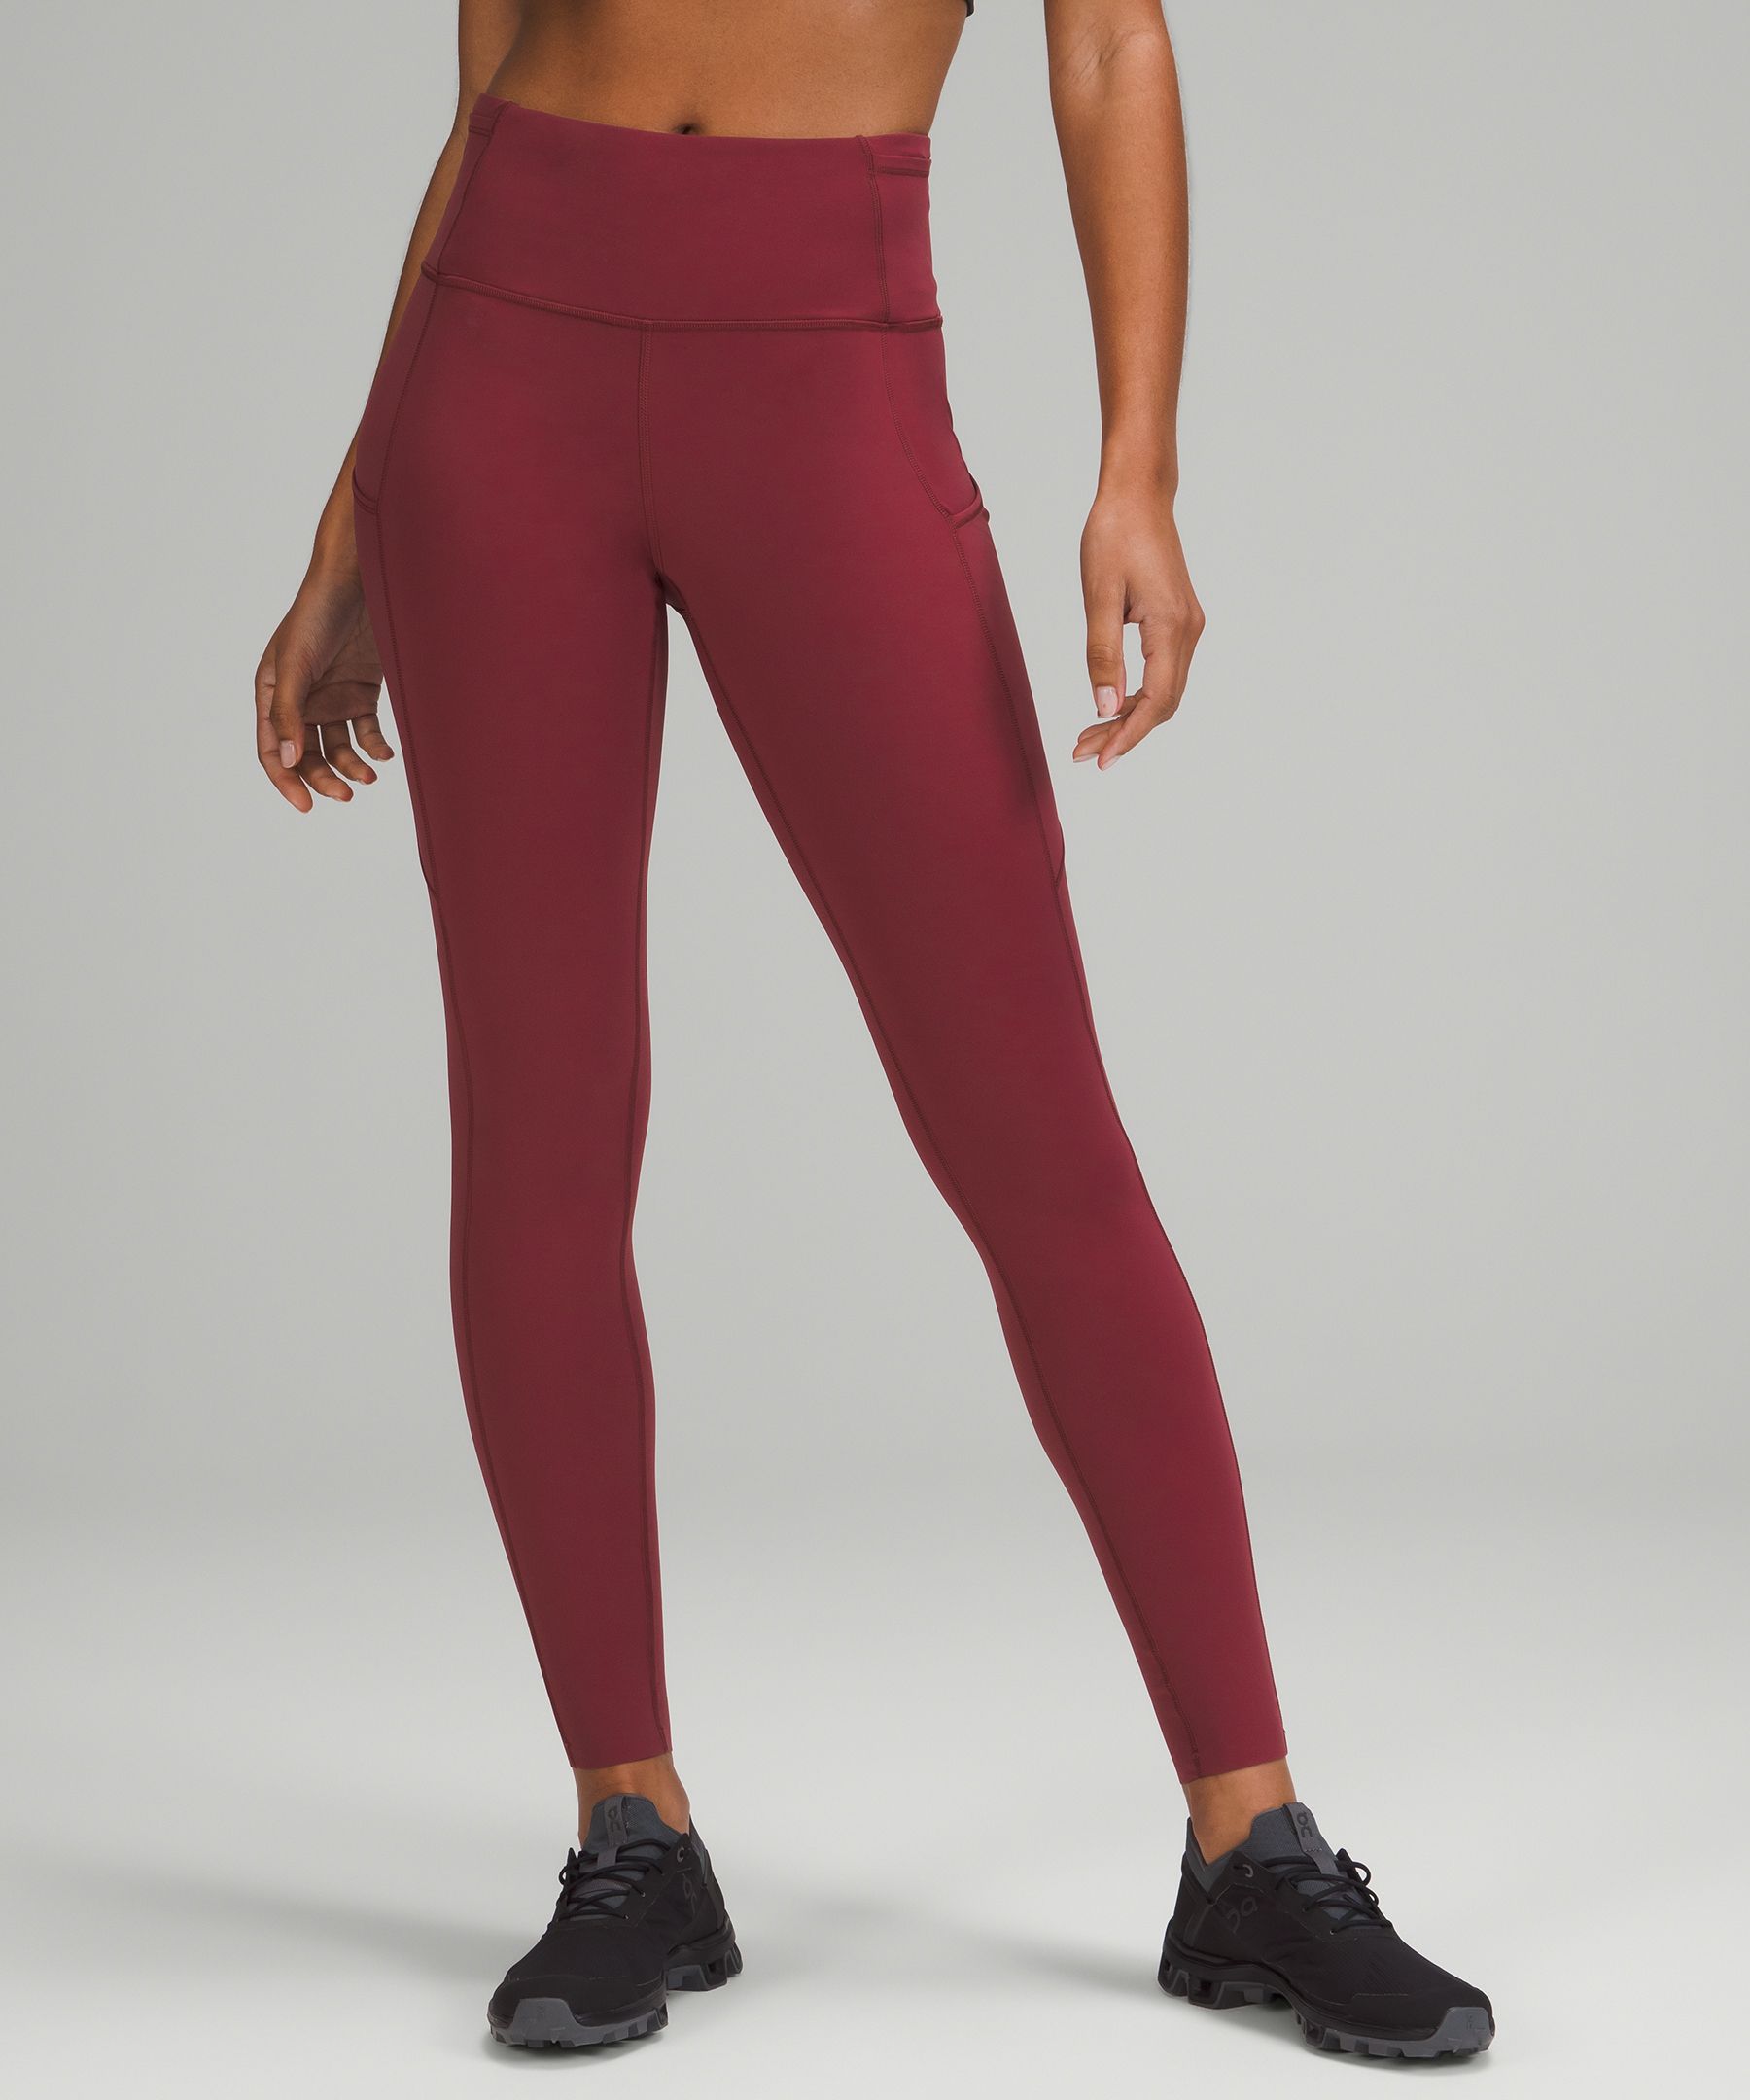 Lululemon Fast And Free Brushed Fabric High-rise Leggings 28" In Mulled Wine